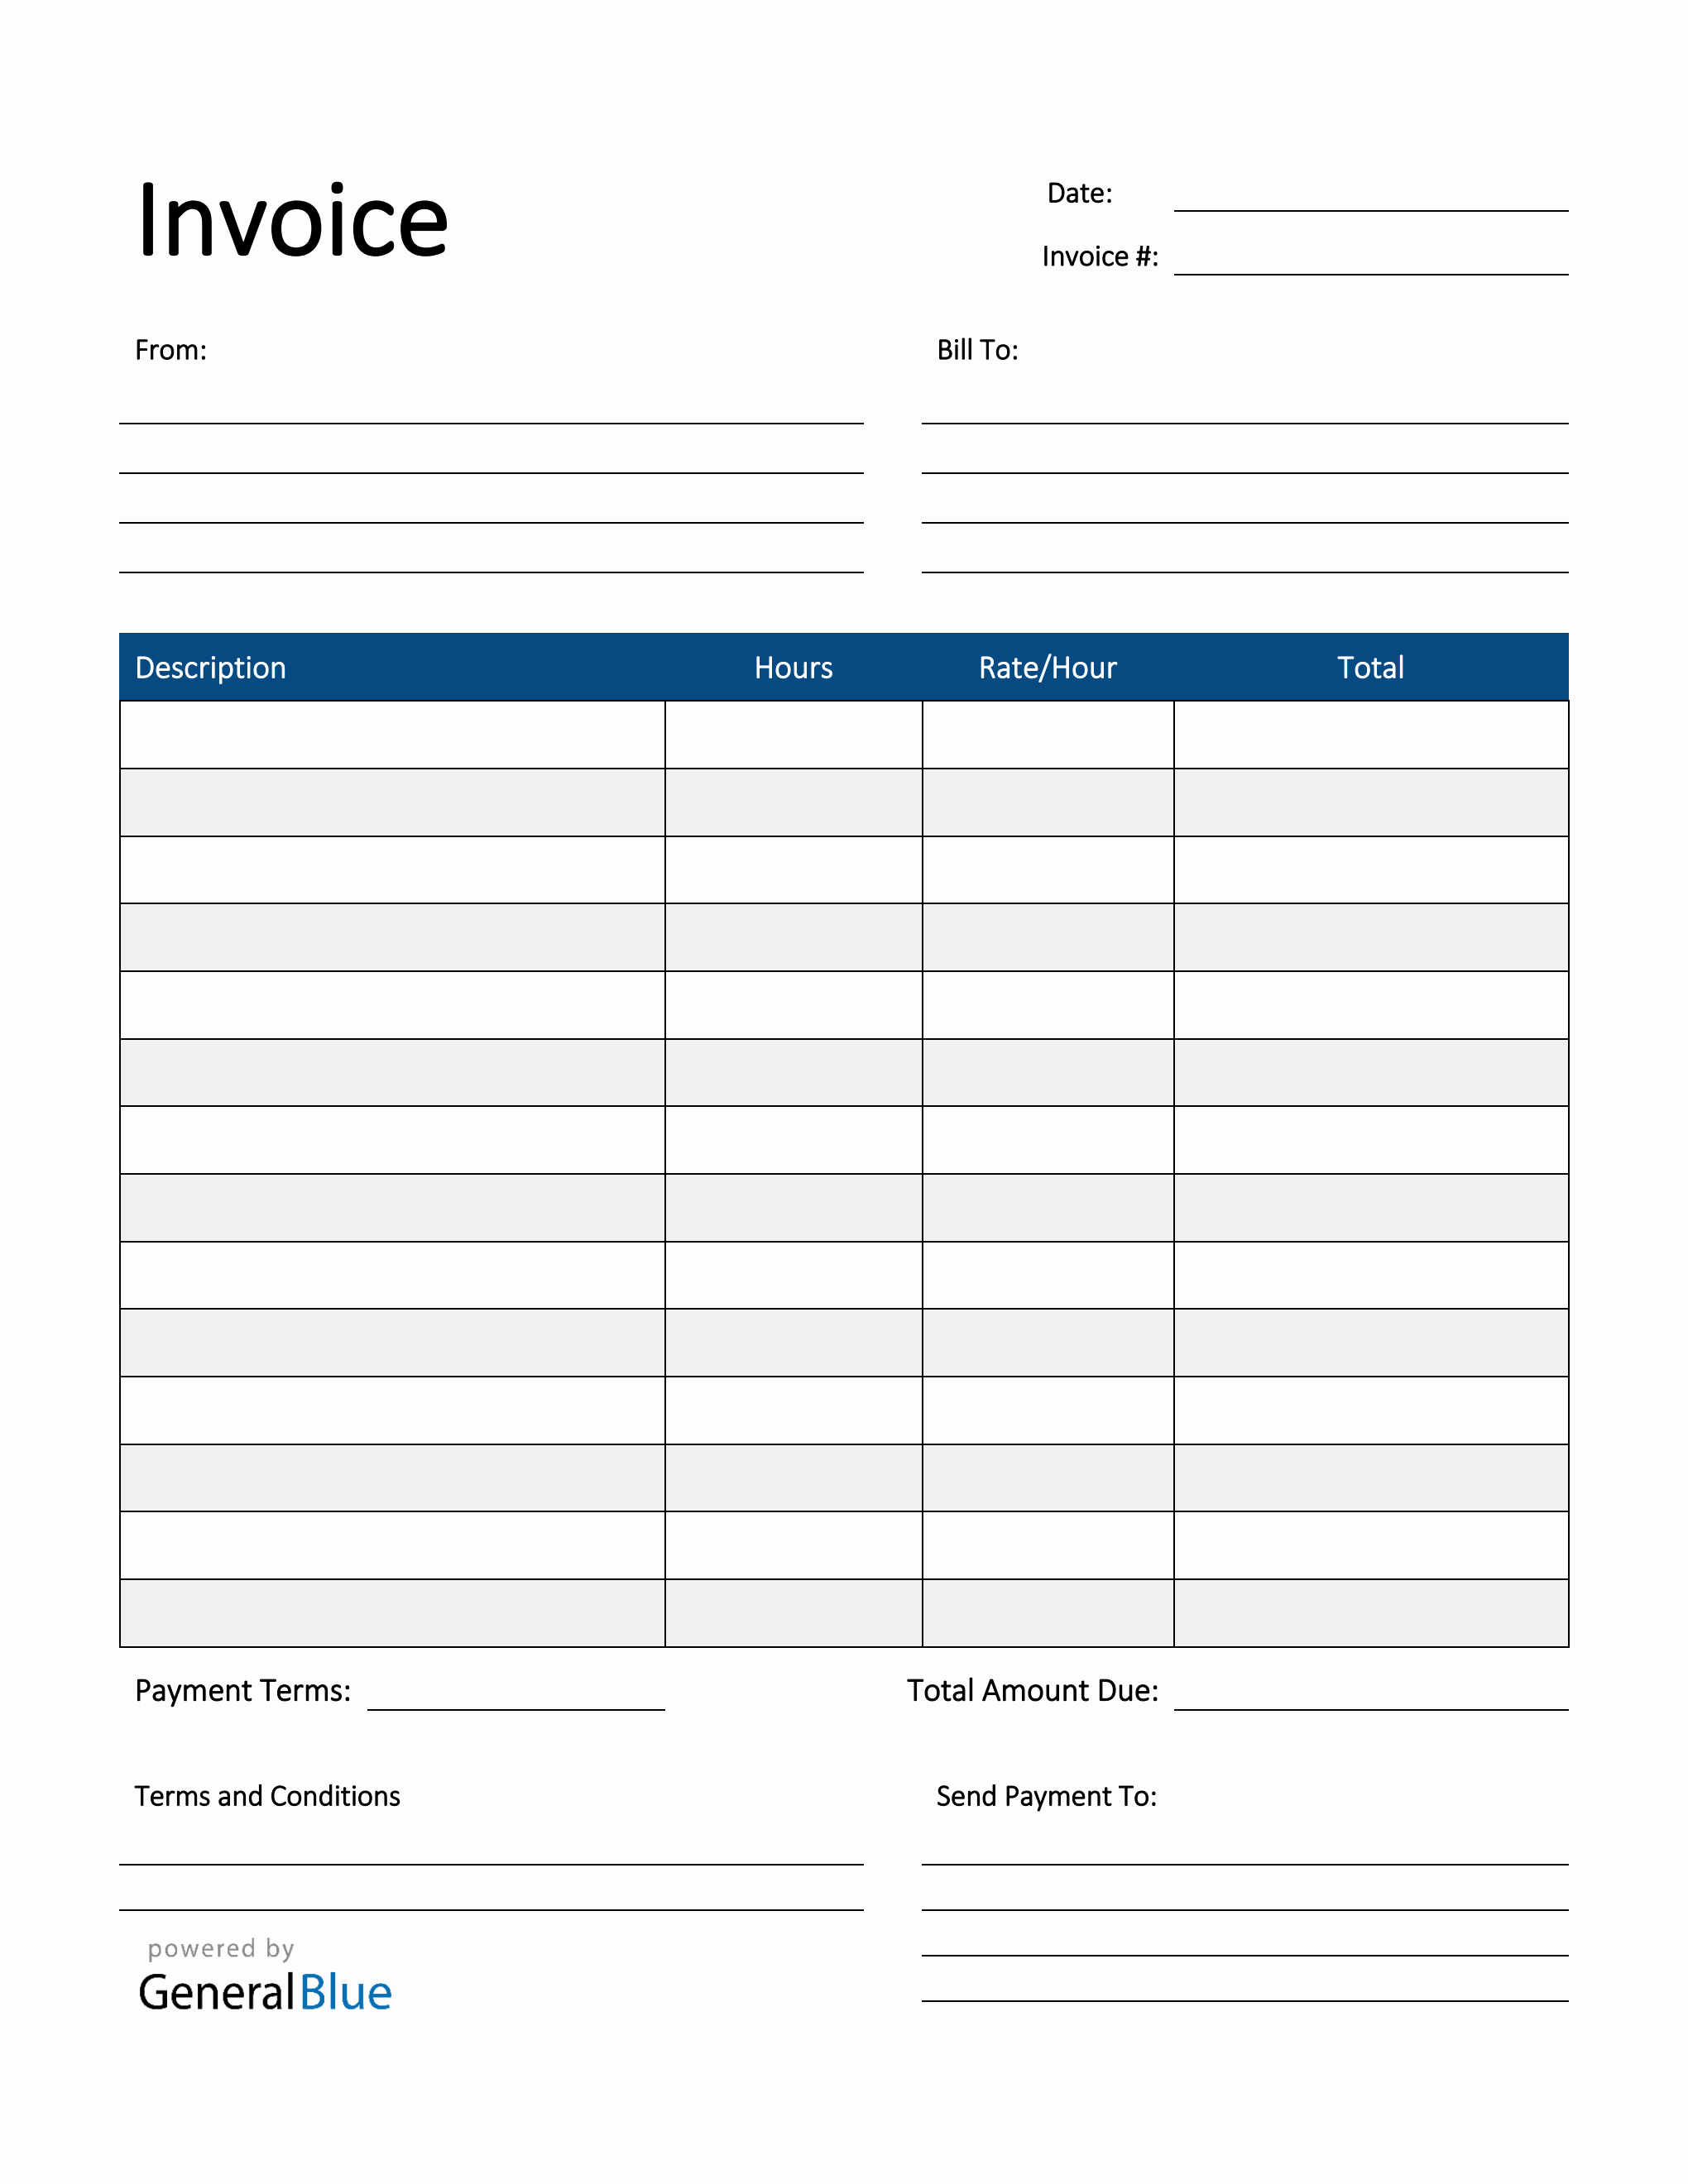 Freelance Hourly Invoice Template In PDF Striped 